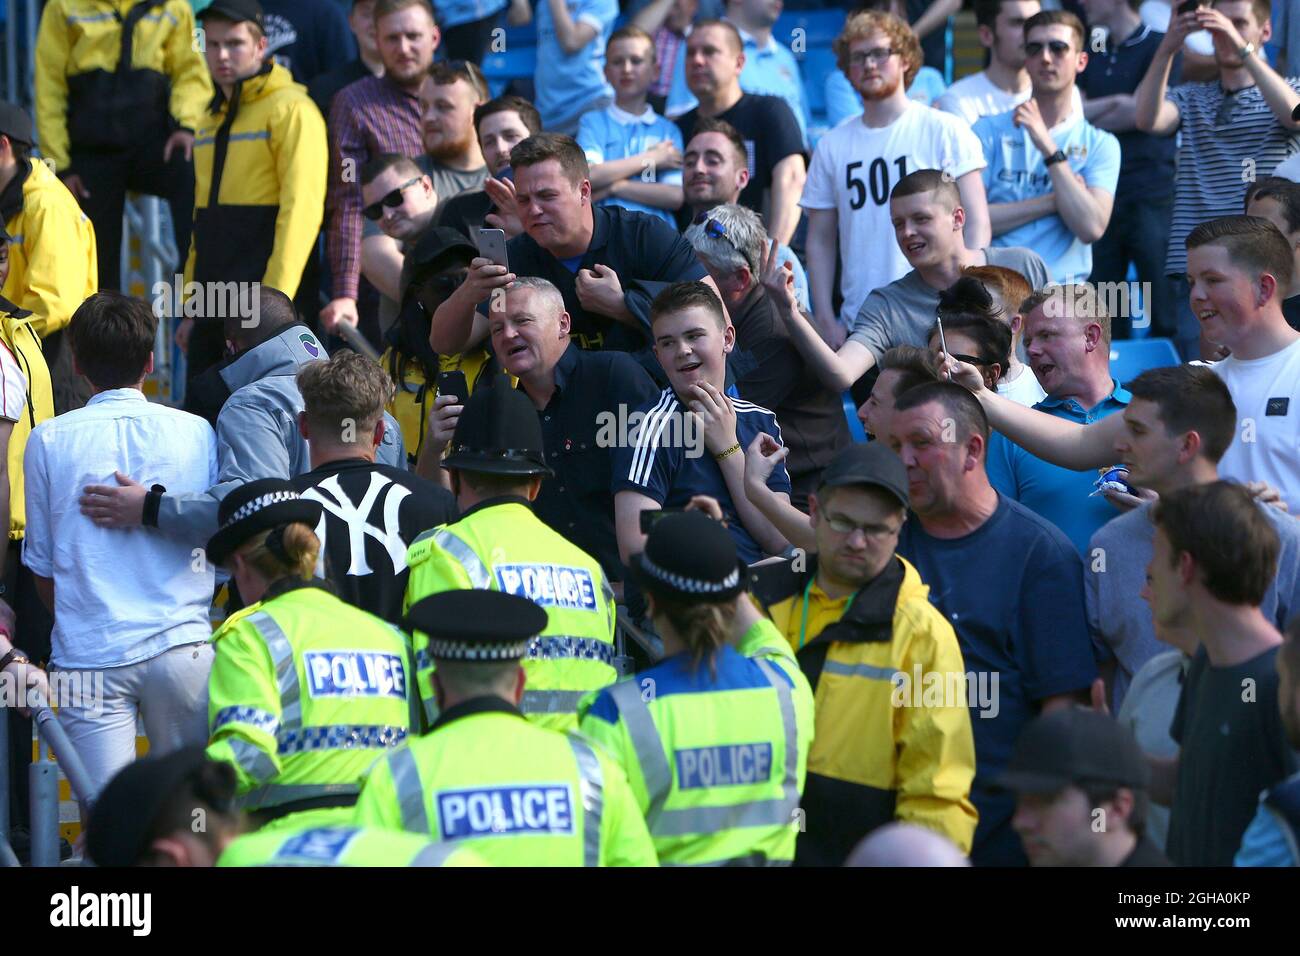 Manchester City fans taunt an Arsenal fan as he is ejected by police for  fighting during the Barclays Premier League match at the Etihad Stadium.  Photo credit should read: Philip Oldham/Sportimage via